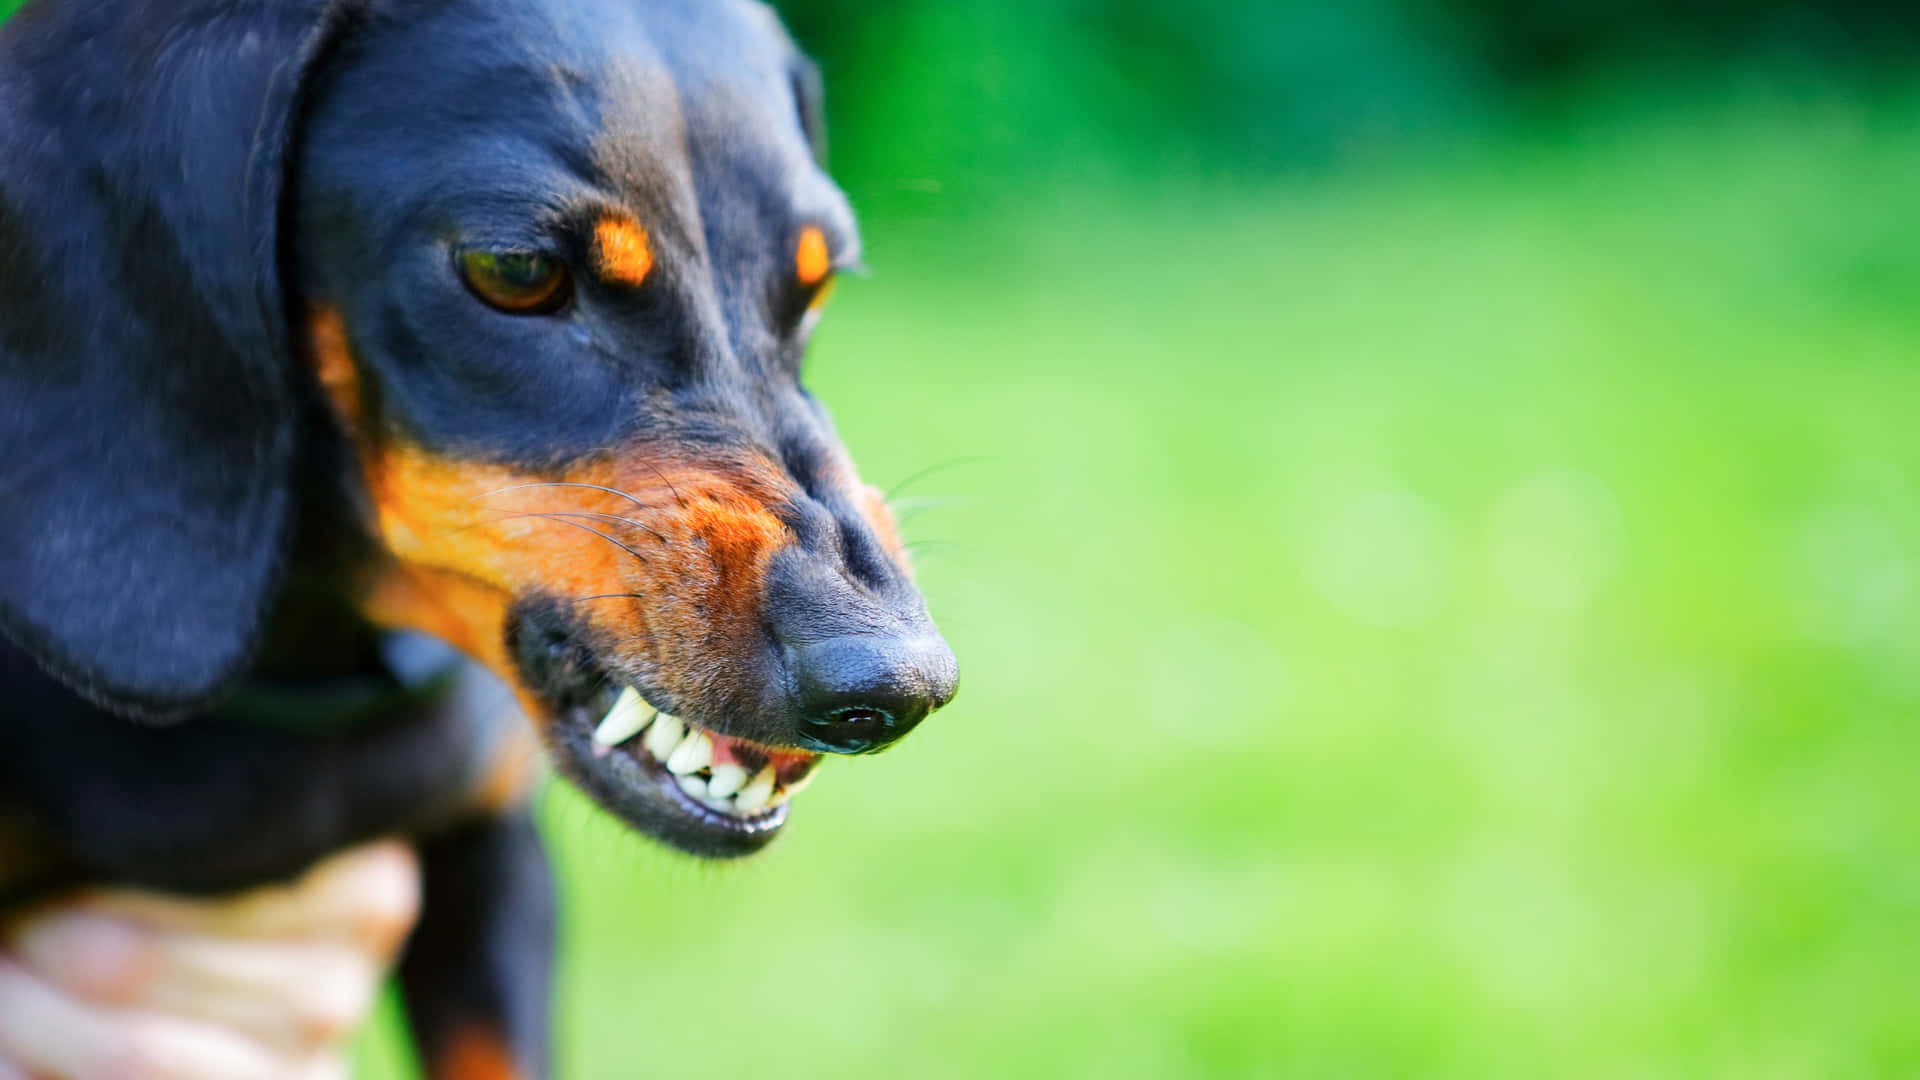 A Growling Doberman In Intimidating Stance Wallpaper